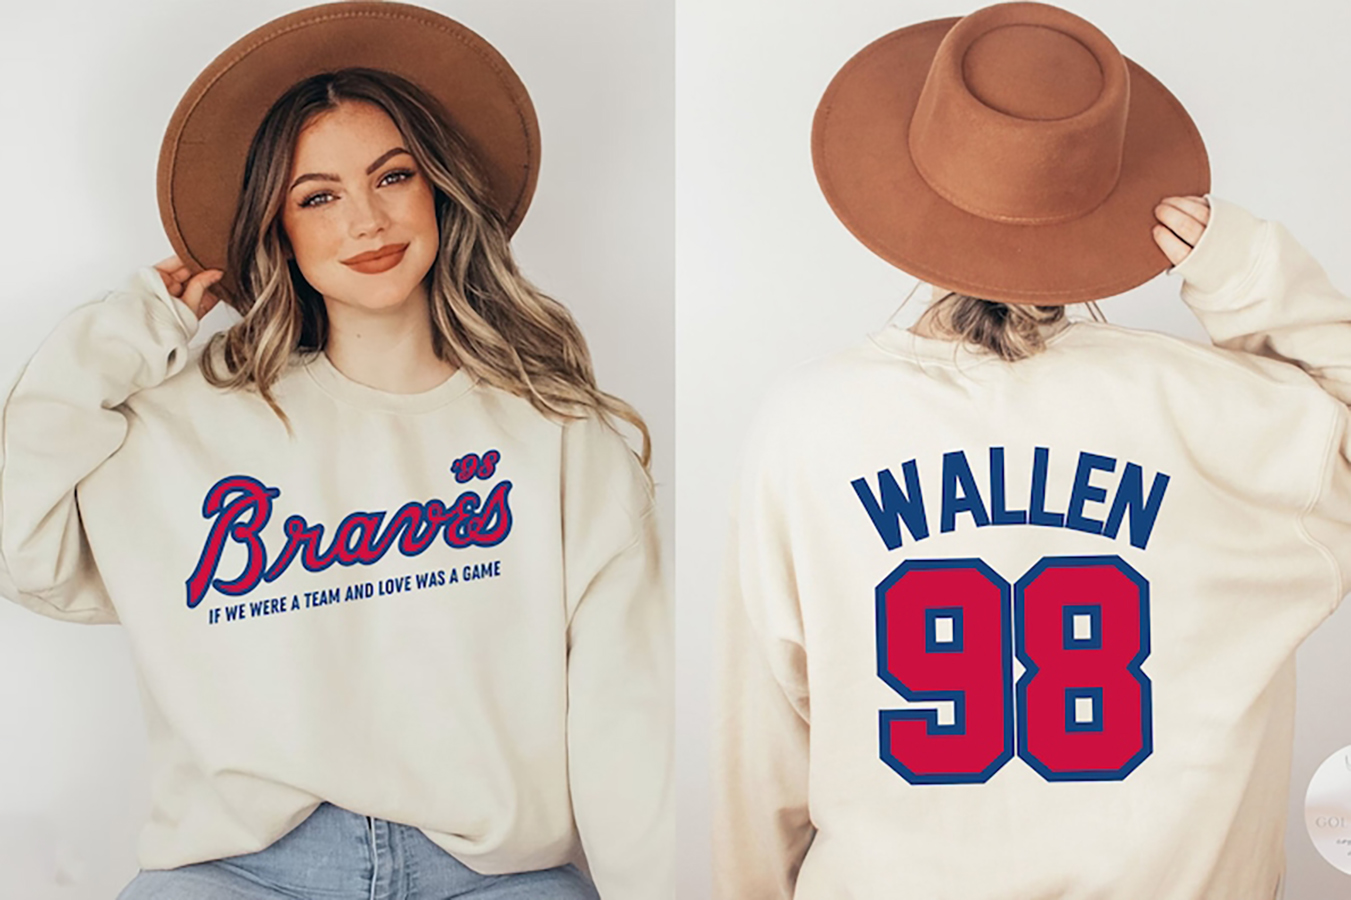 Wed Have Been The 98 Braves Shirt - High-Quality Printed Brand